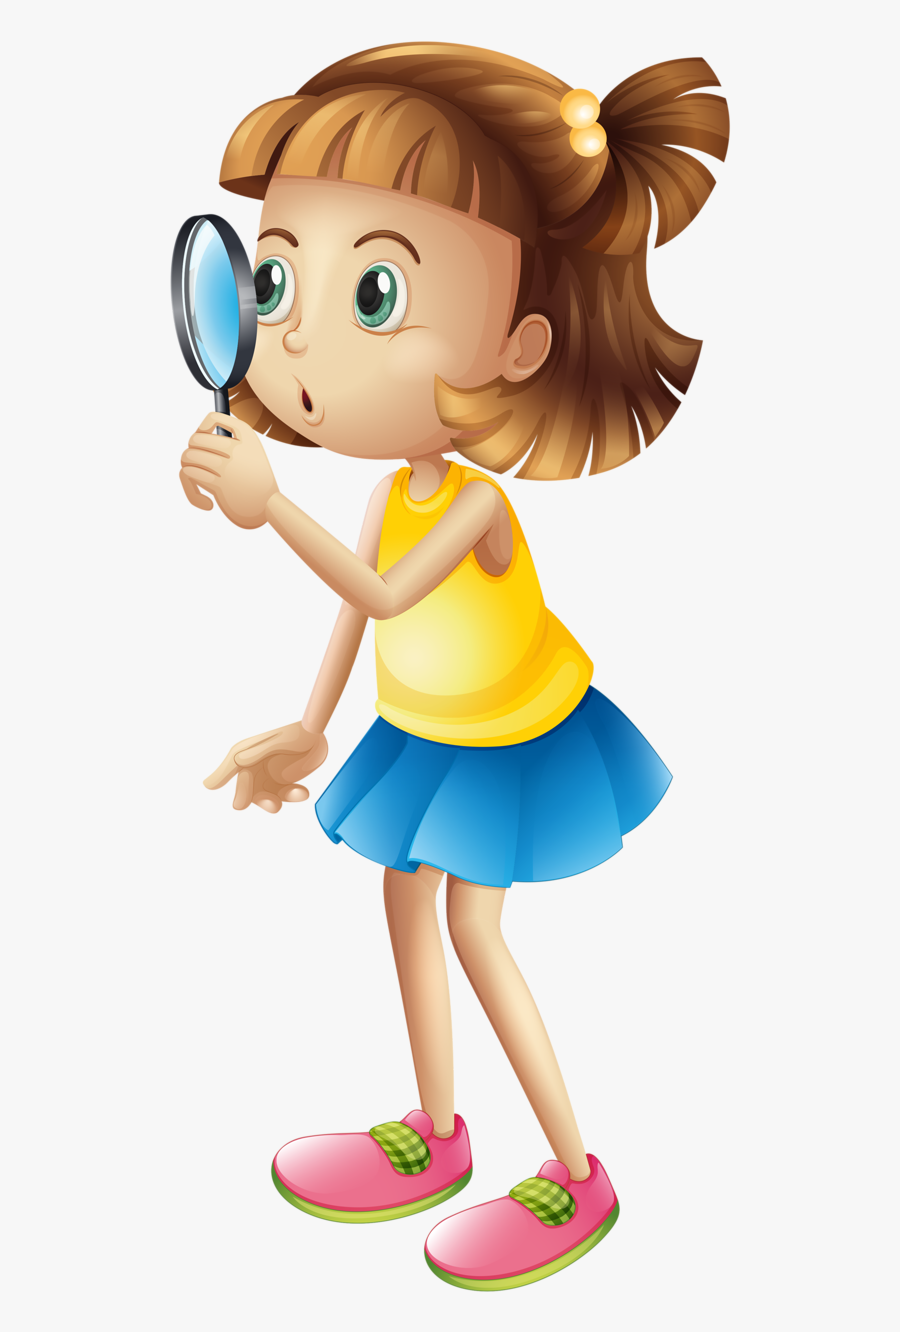 Nnre 50zv Cartoon Girl Thinking Png Free Transparent Clipart Clipartkey